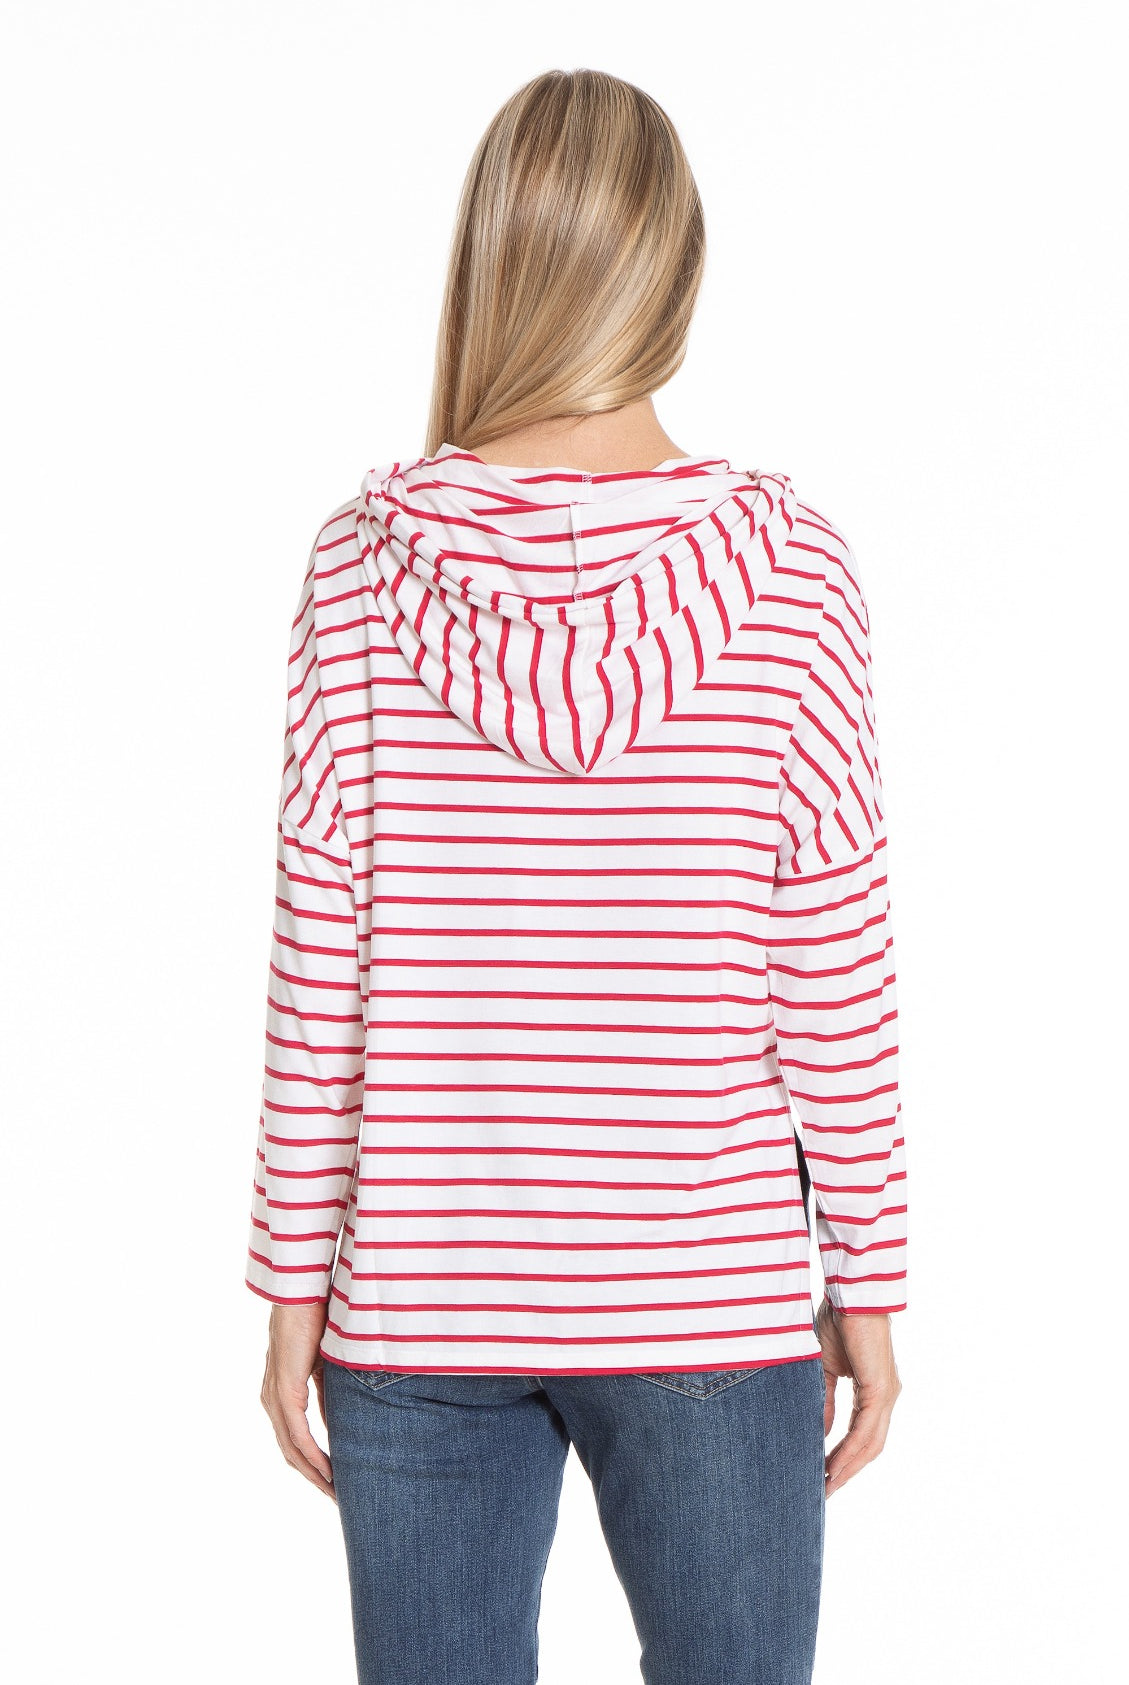 Hoodie With Side Slits RED/White Stripe Back APNY